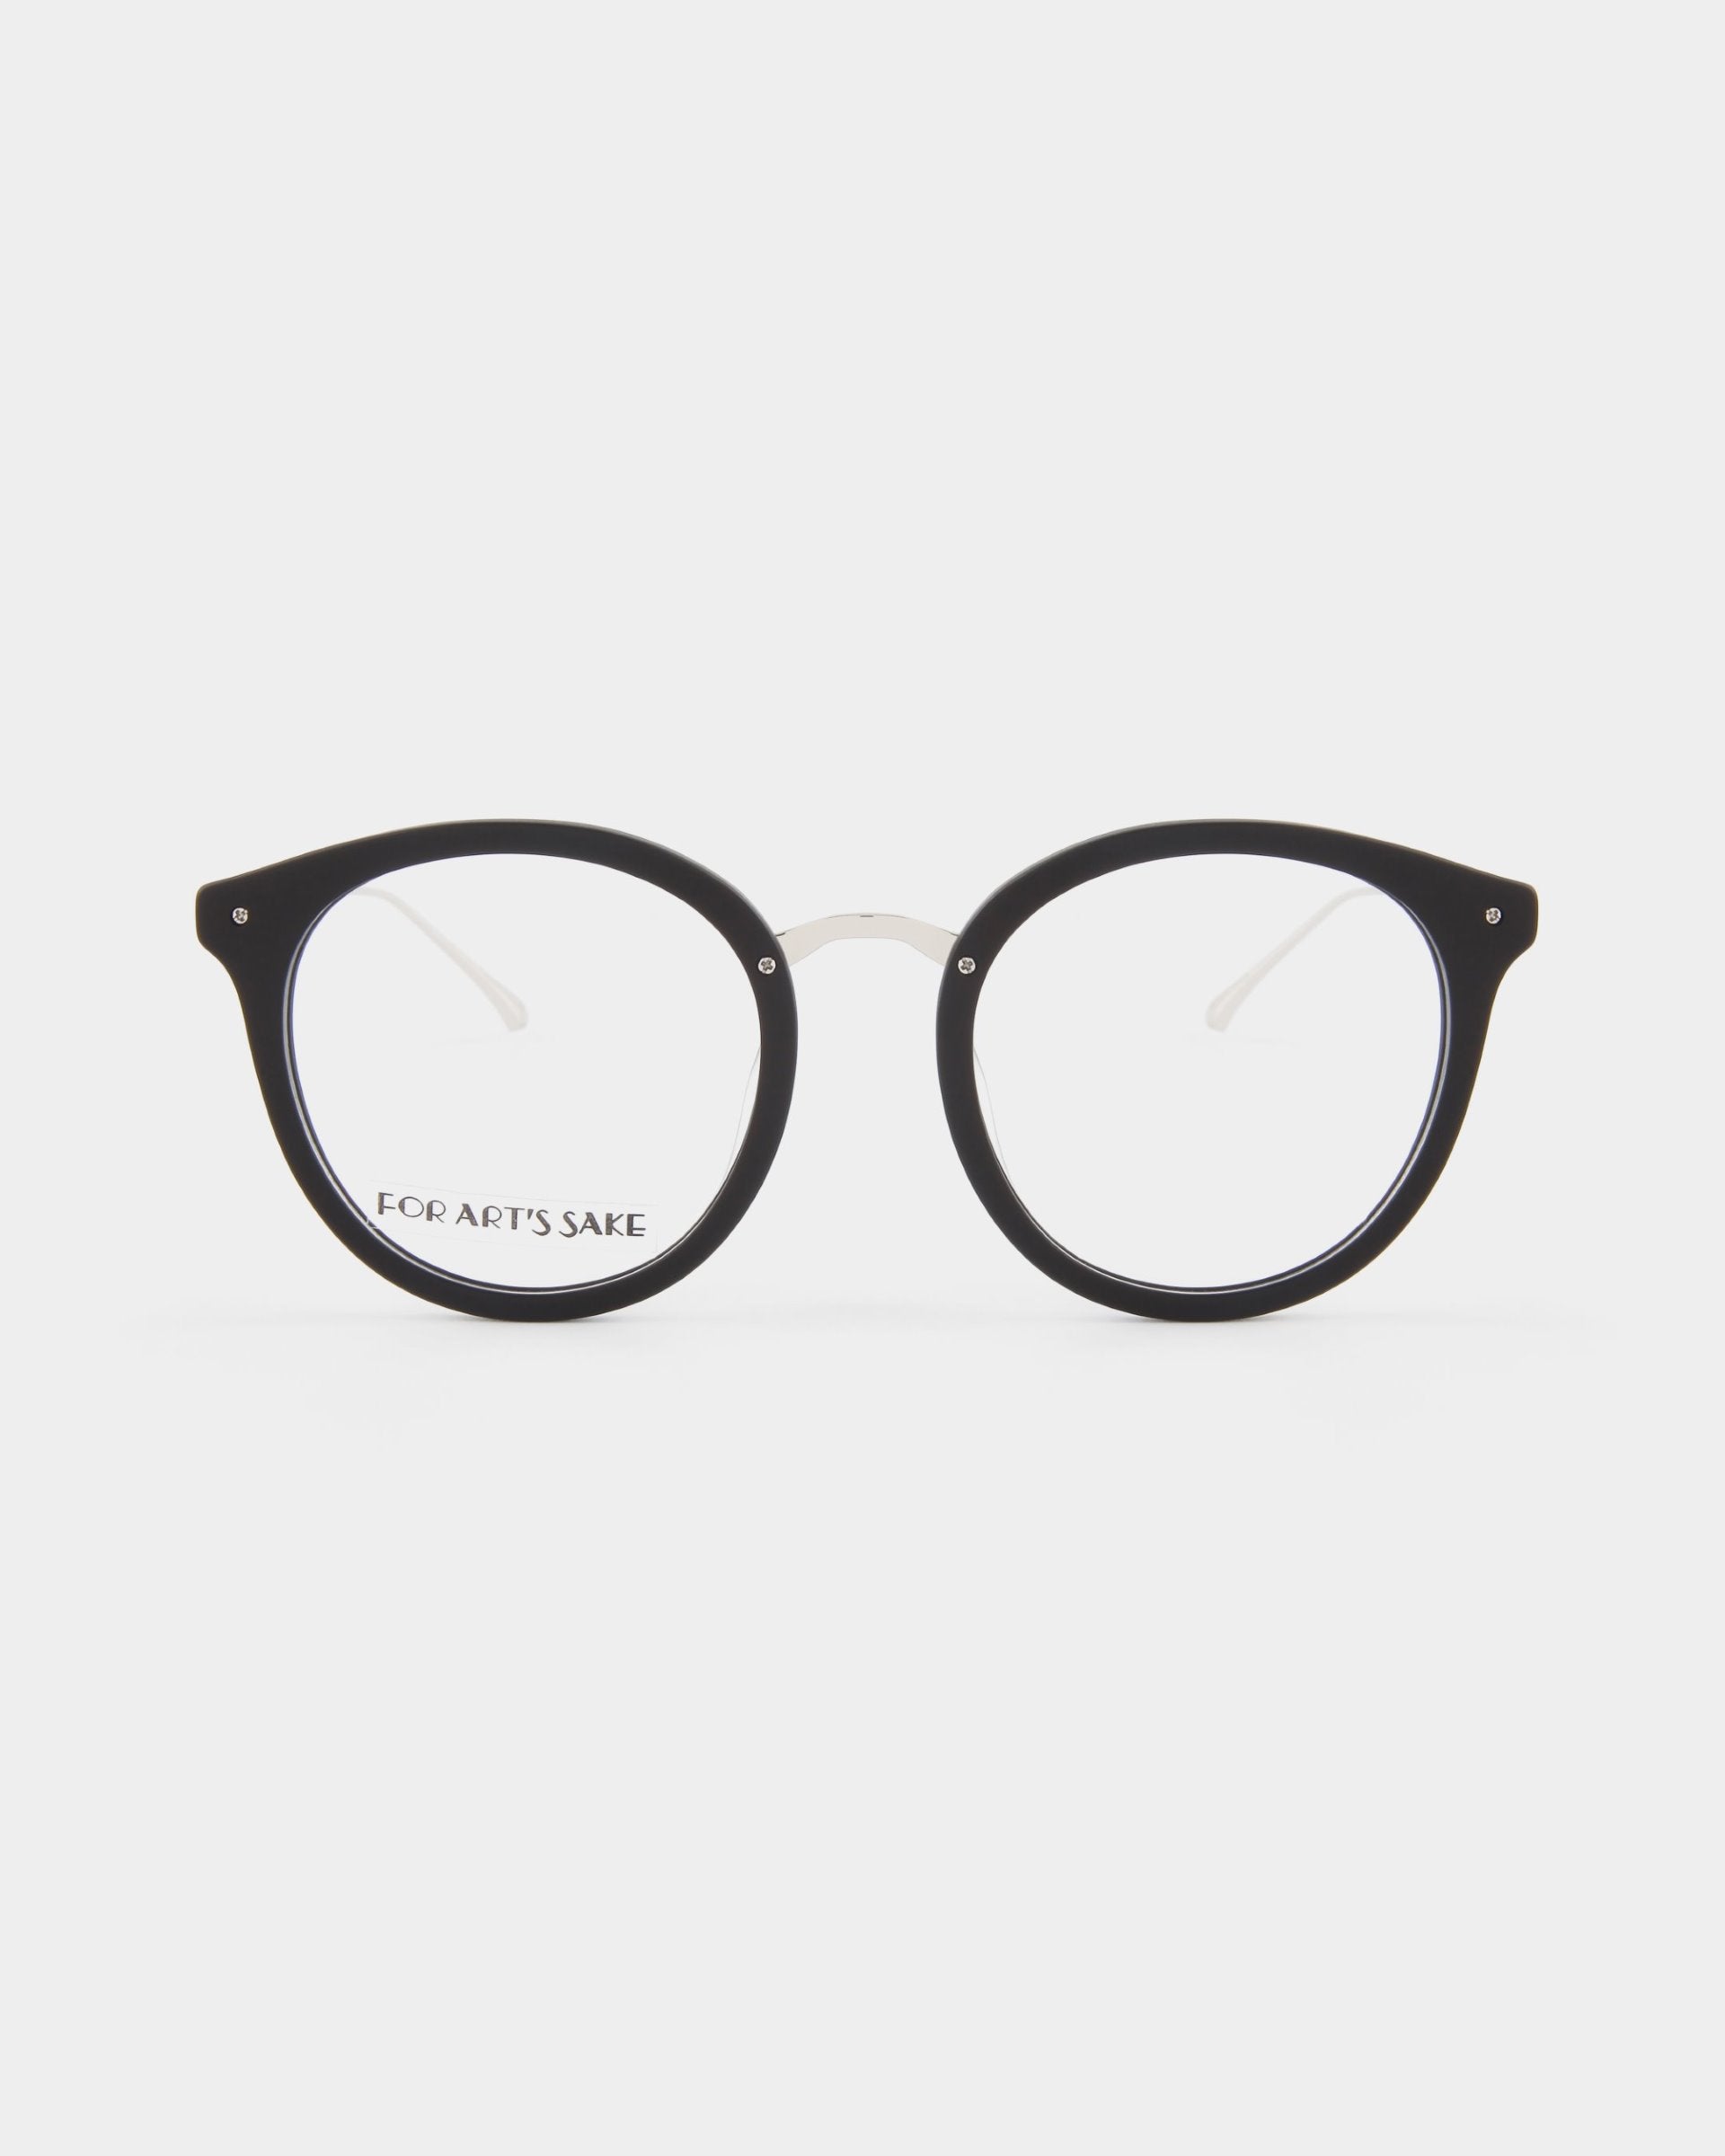 A pair of round, black-rimmed eyeglasses with clear lenses, displayed against a white background. The inside of the left temple arm is inscribed with "FOR ARTS SAKE." The glasses feature UV protection lenses and have a classic and minimalistic design. These are the Jackie by For Art's Sake®.